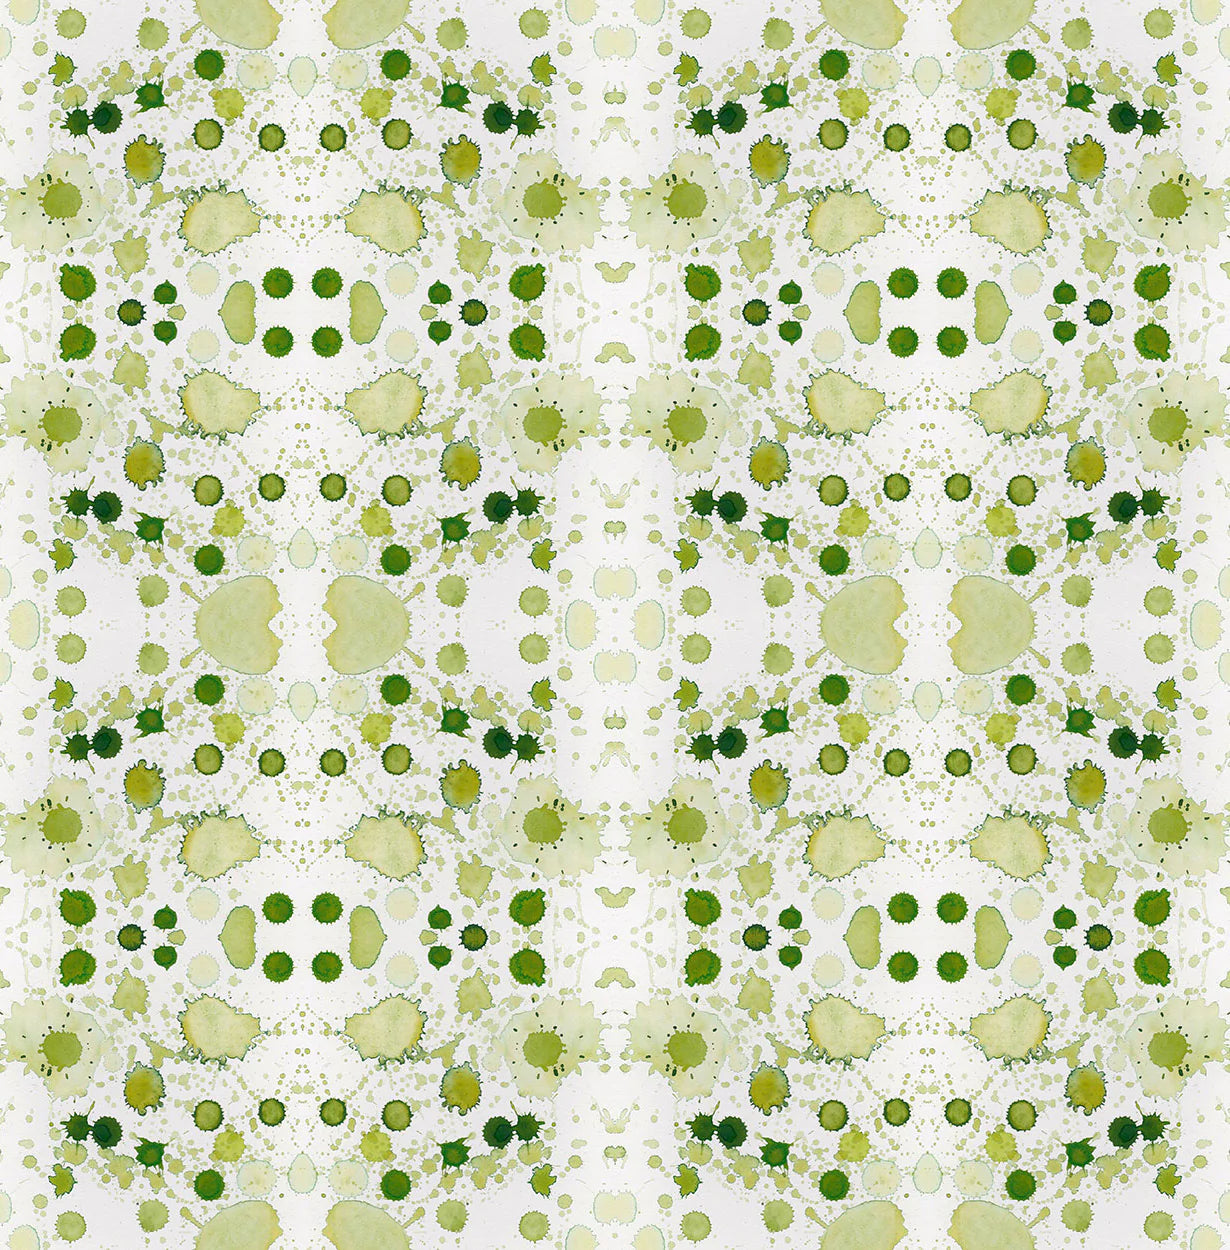 SPLATTER Fabric in Green with Envy - SAMPLE